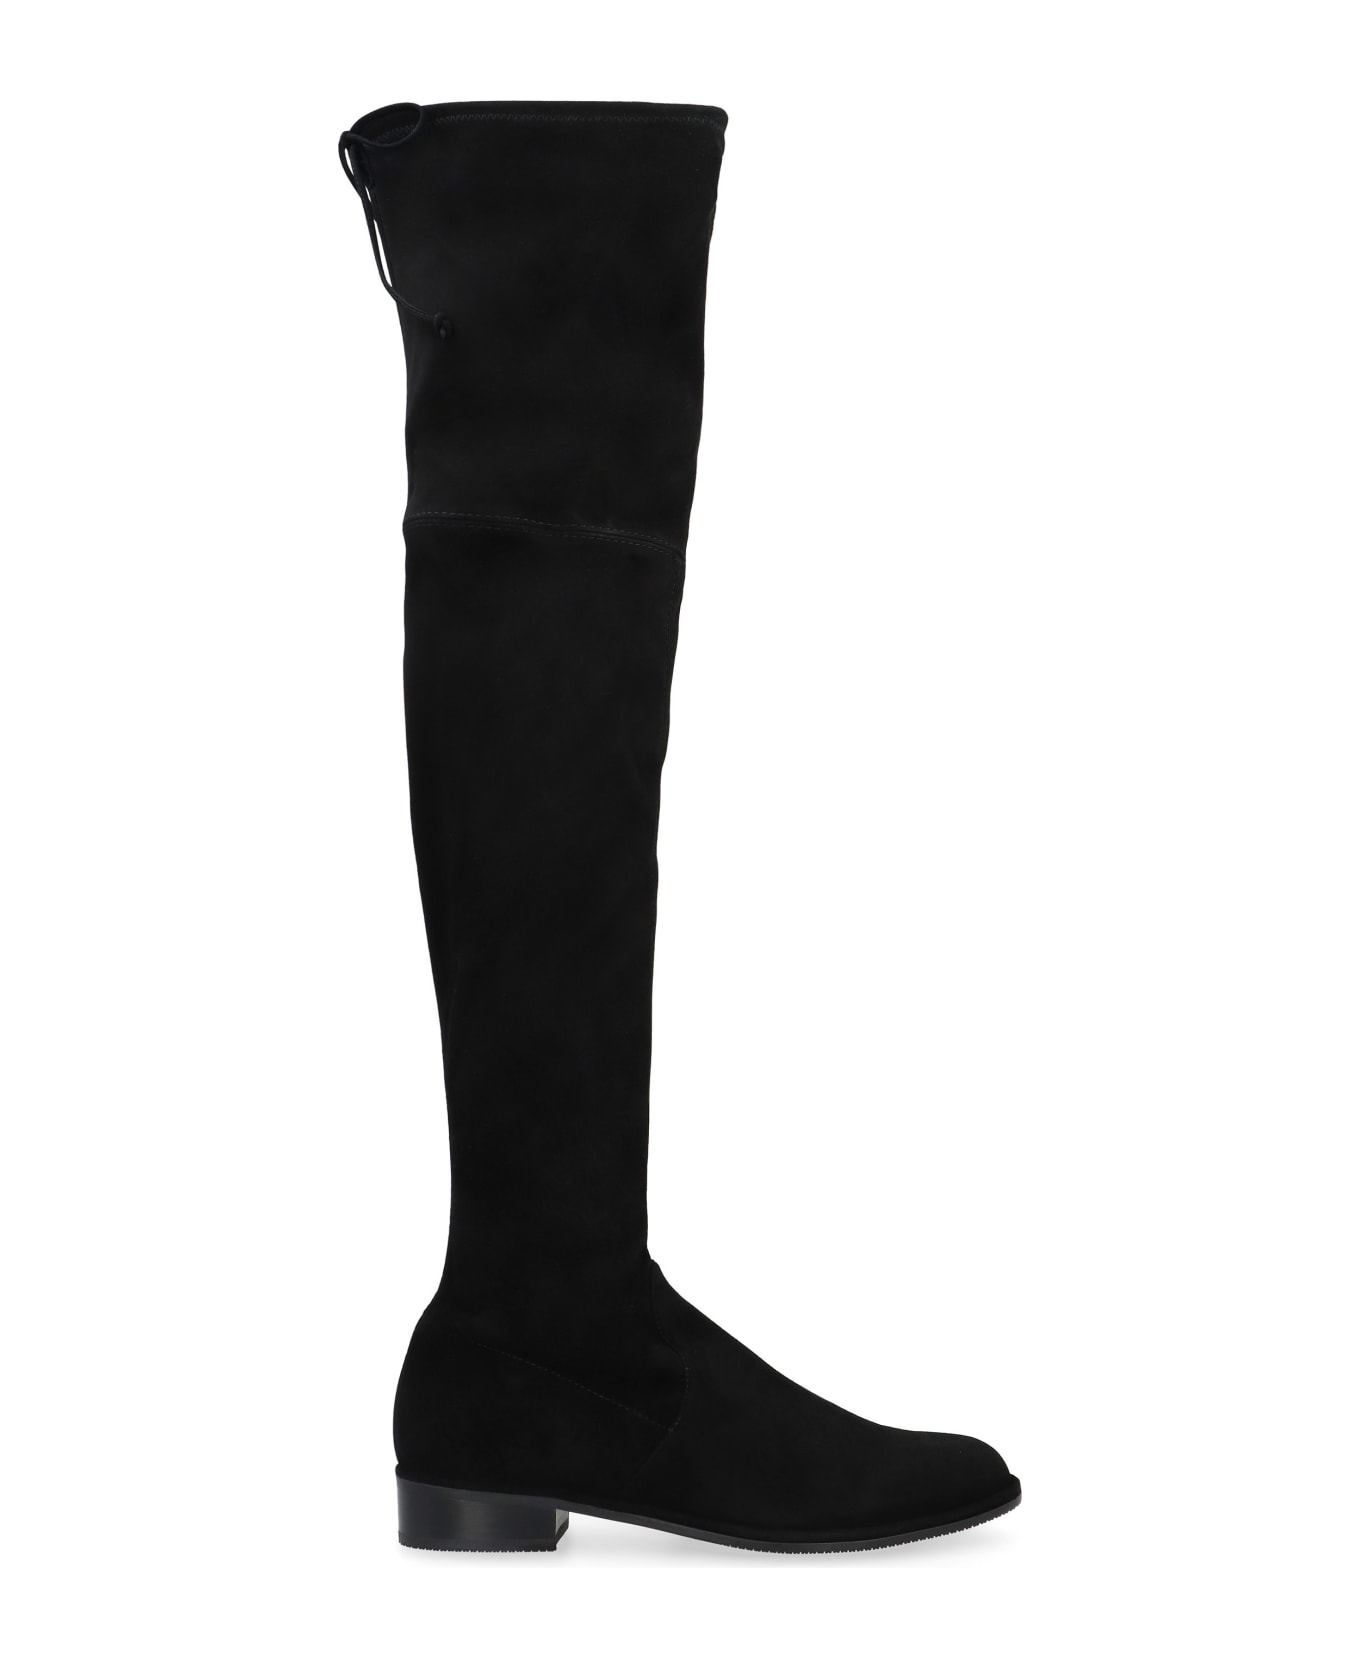 Stuart Weitzman Lowland Stretch Suede Over The Knee Boots - black